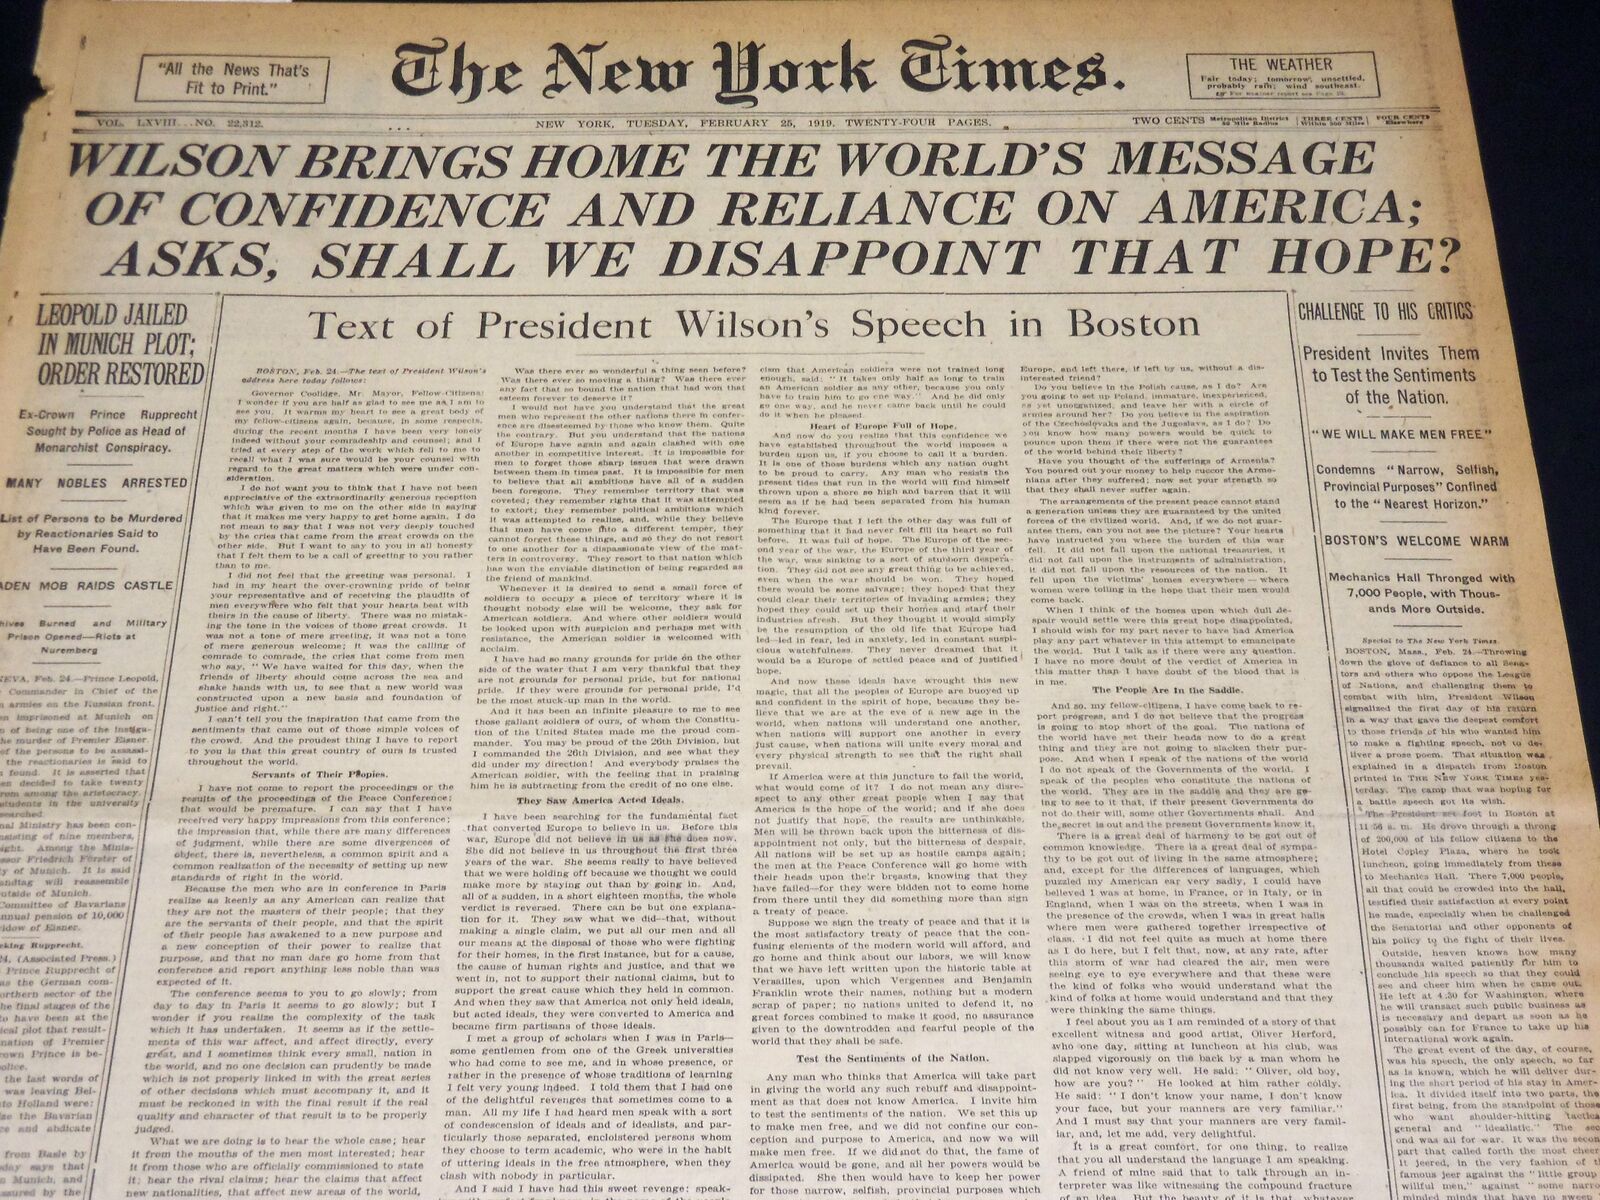 1919 FEBRUARY 25 NEW YORK TIMES - WILSON BRINGS HOME WORLD'S MESSAGE - NT 7970